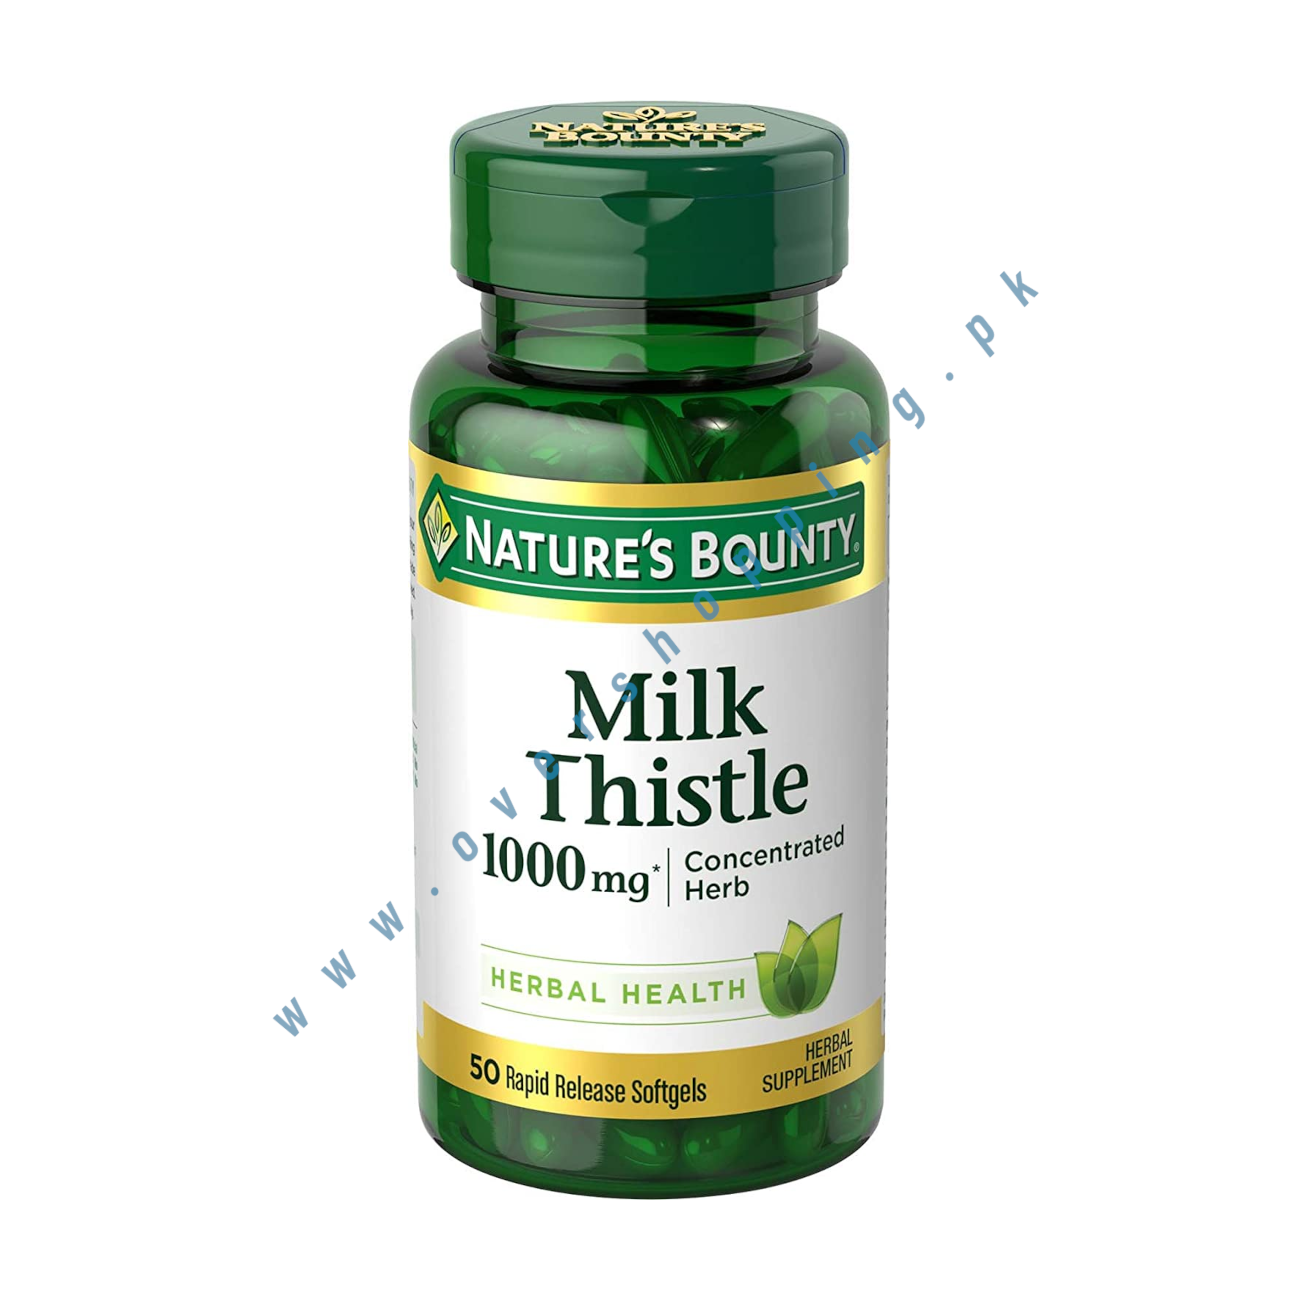 Nature's Bounty Milk Thistle Herbal Supplement | Natural Liver Cleanse & Detox | 1000 mg | 50 so